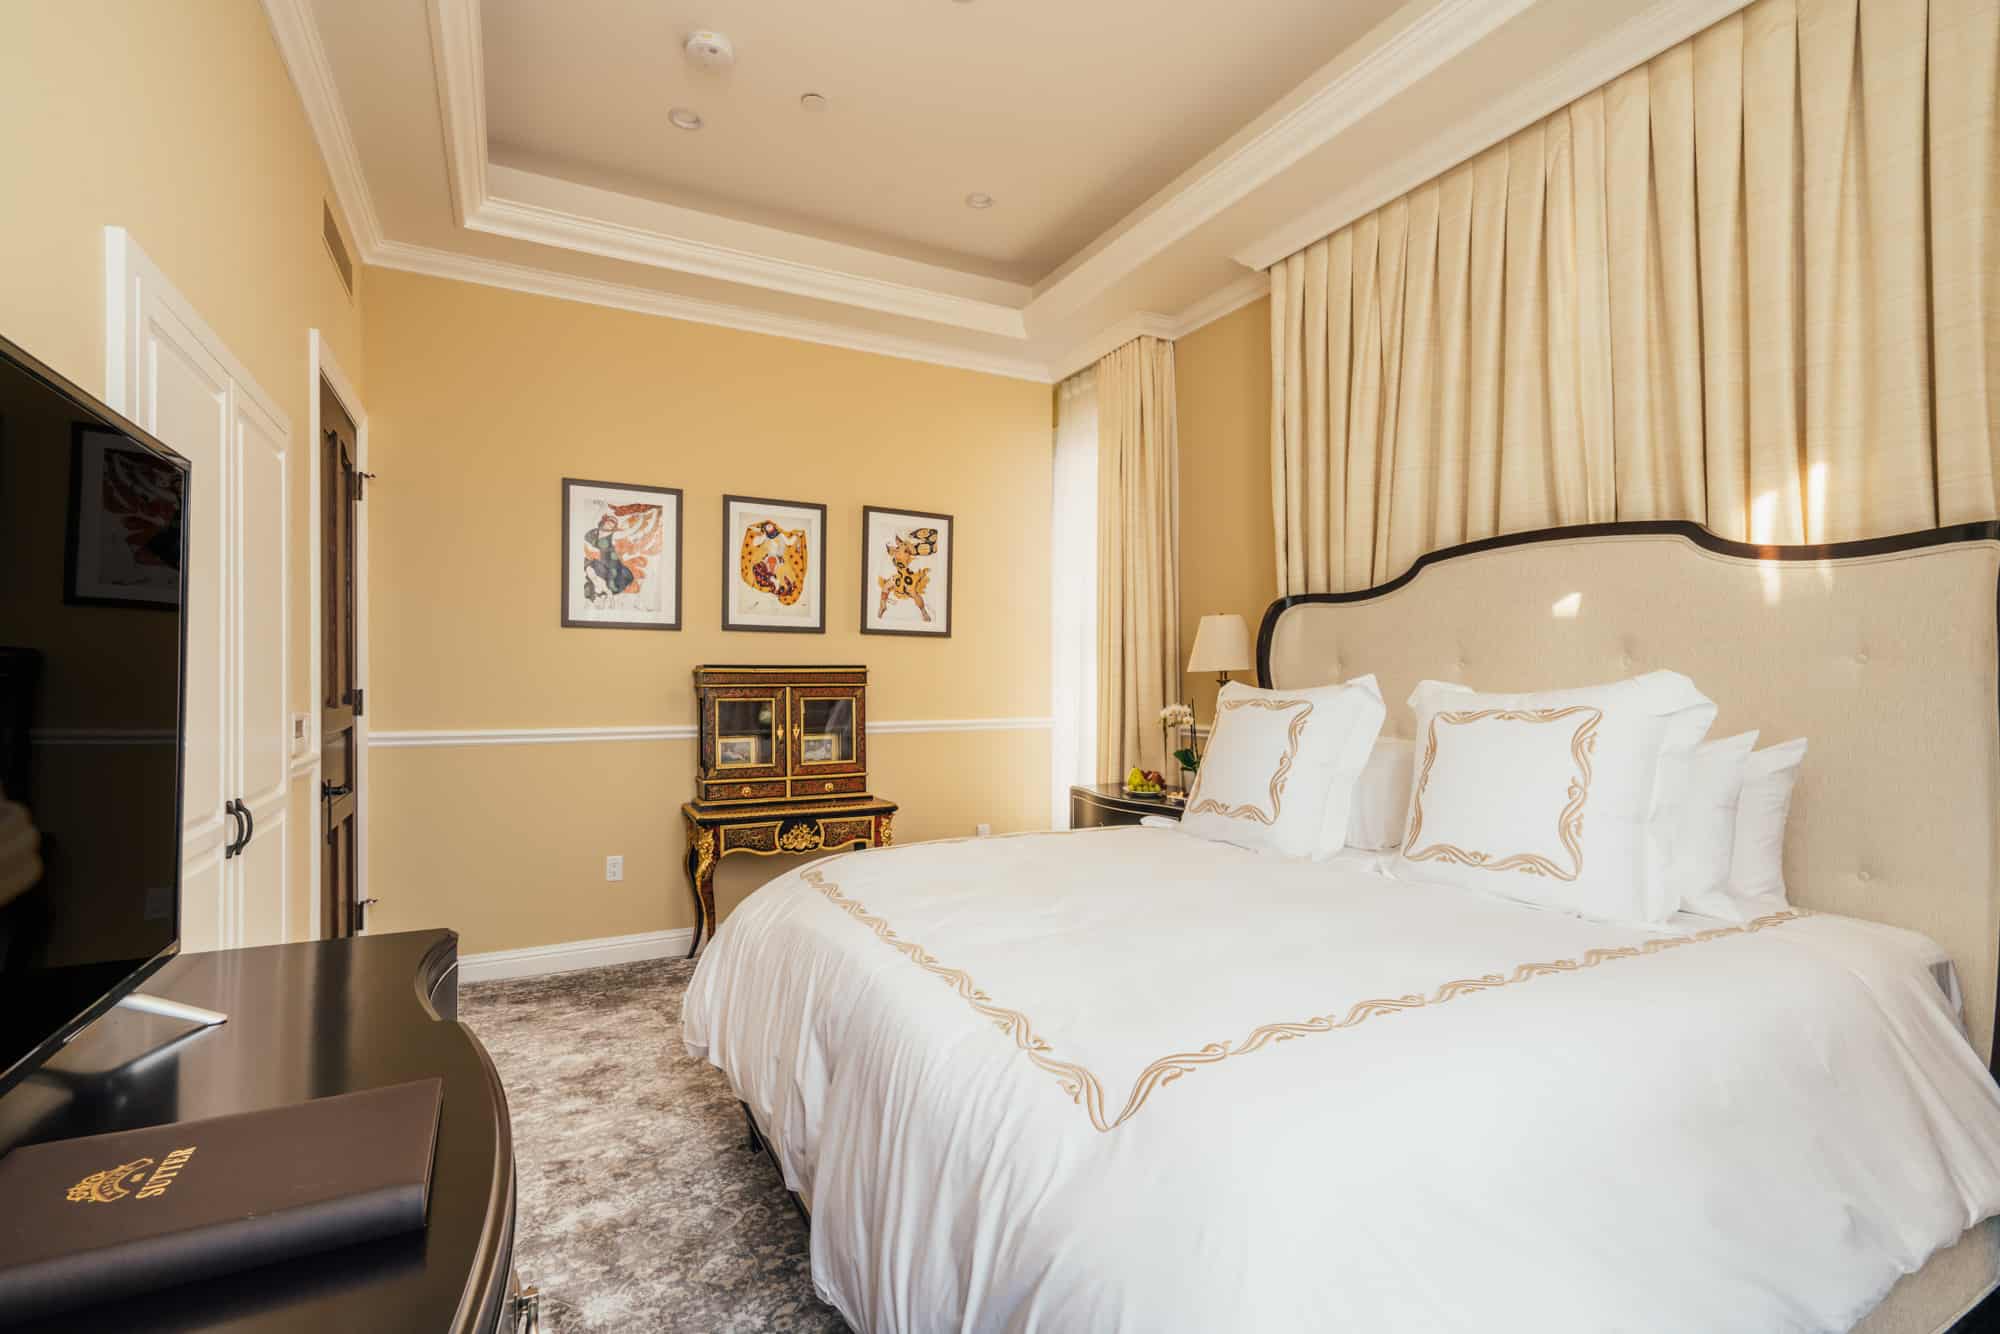 The Corner Suite - carpeted bedroom, proper closet, an Eastern King bed, bathroom has a shower and separate soaking tub.